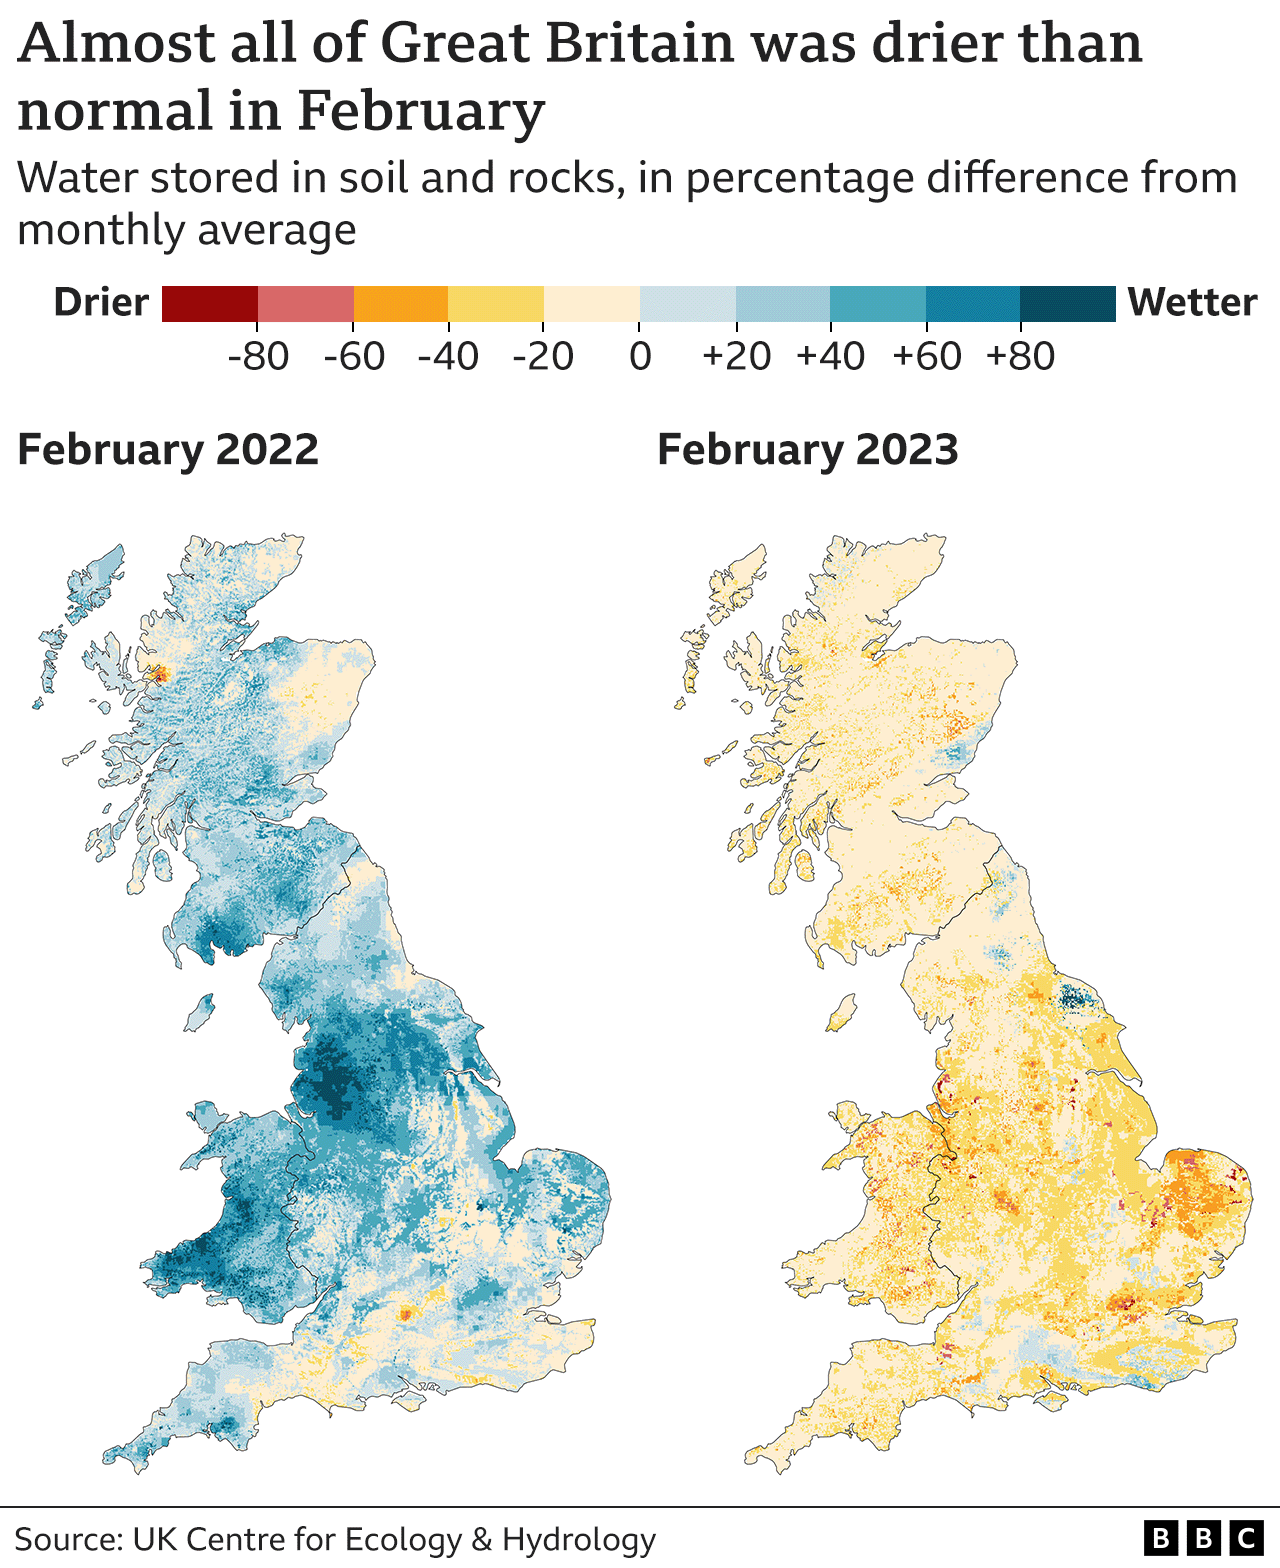 Areas with low subsurface wetness could potentially have drought if dry conditions continue